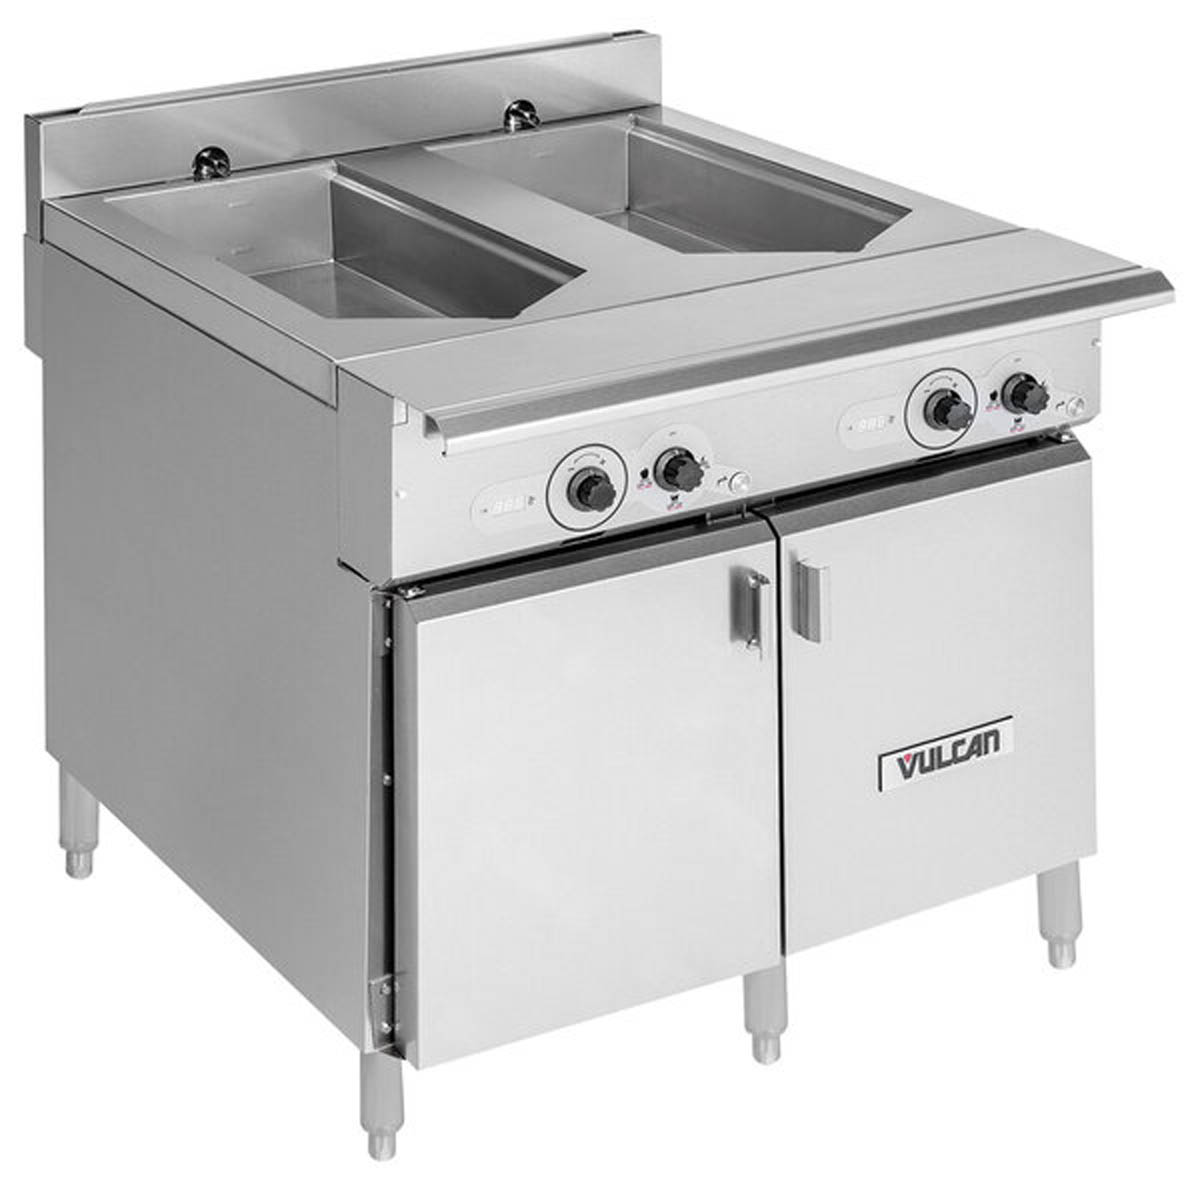 Multi-Functional Cookers